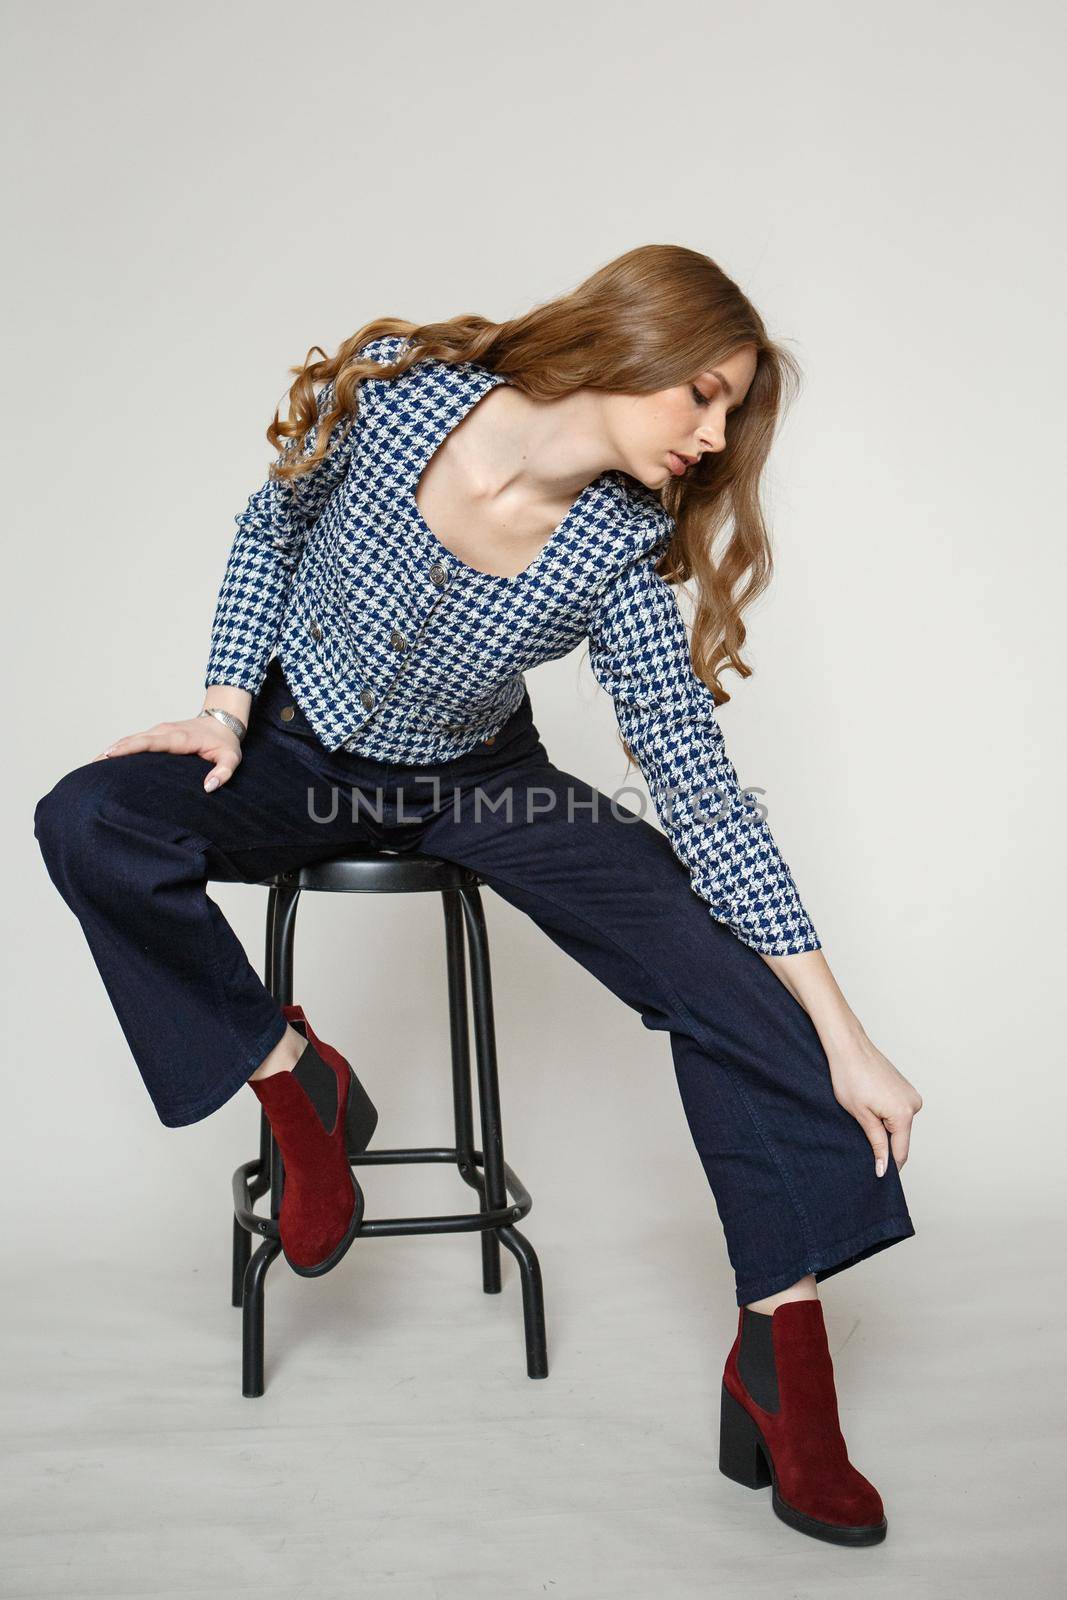 A girl in a denim suit standing on a studio background by deandy